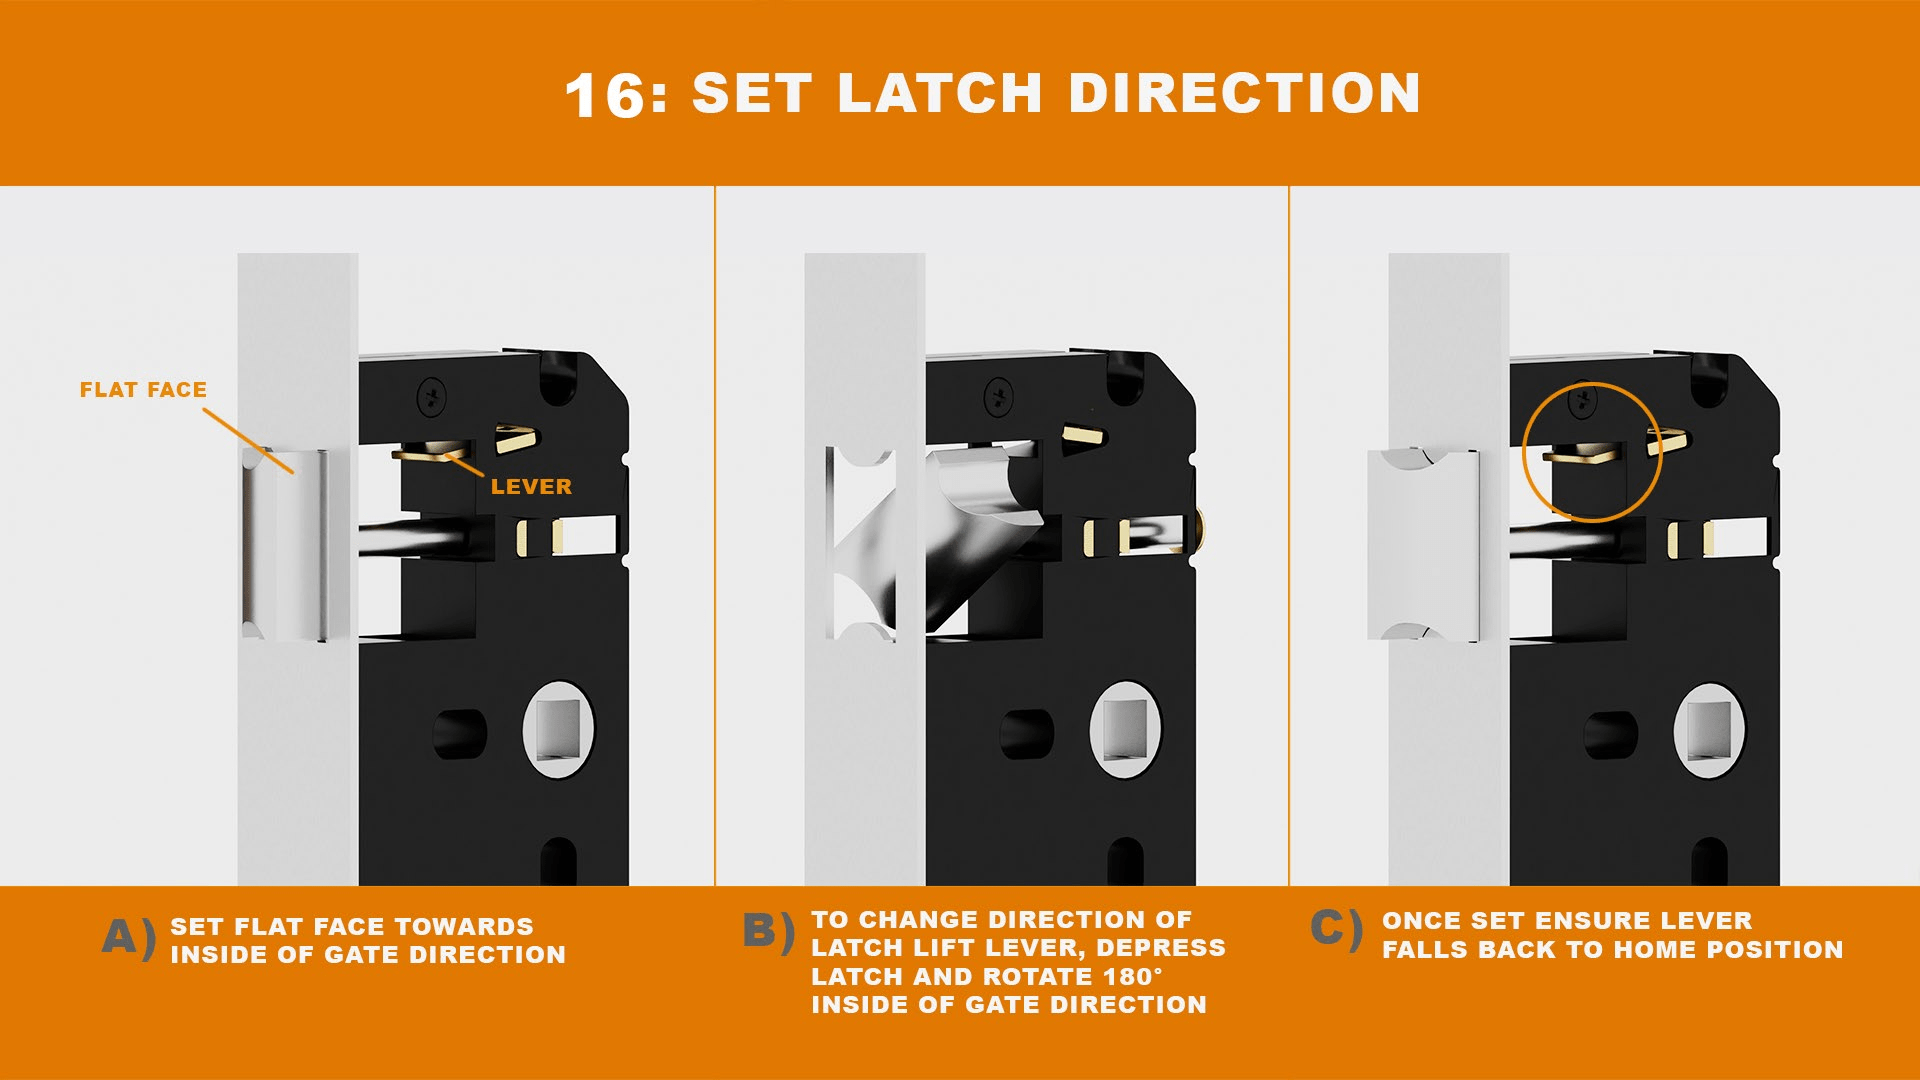 Setting the latch direction